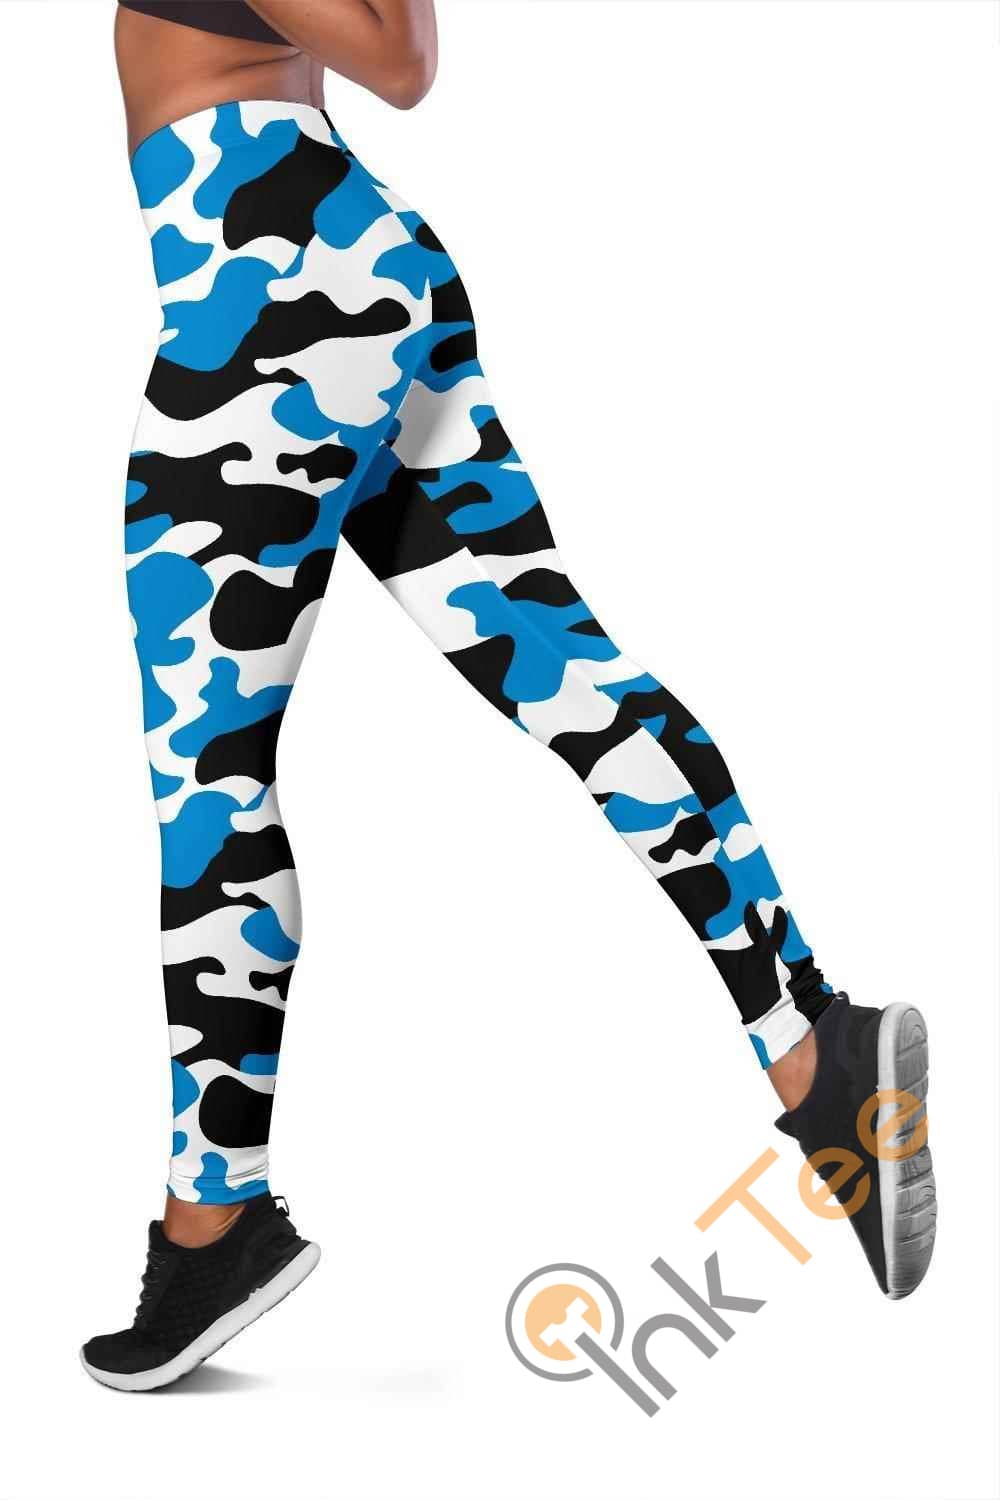 Inktee Store - Carolina Panthers Inspired Tru Camo 3D All Over Print For Yoga Fitness Fashion Women'S Leggings Image